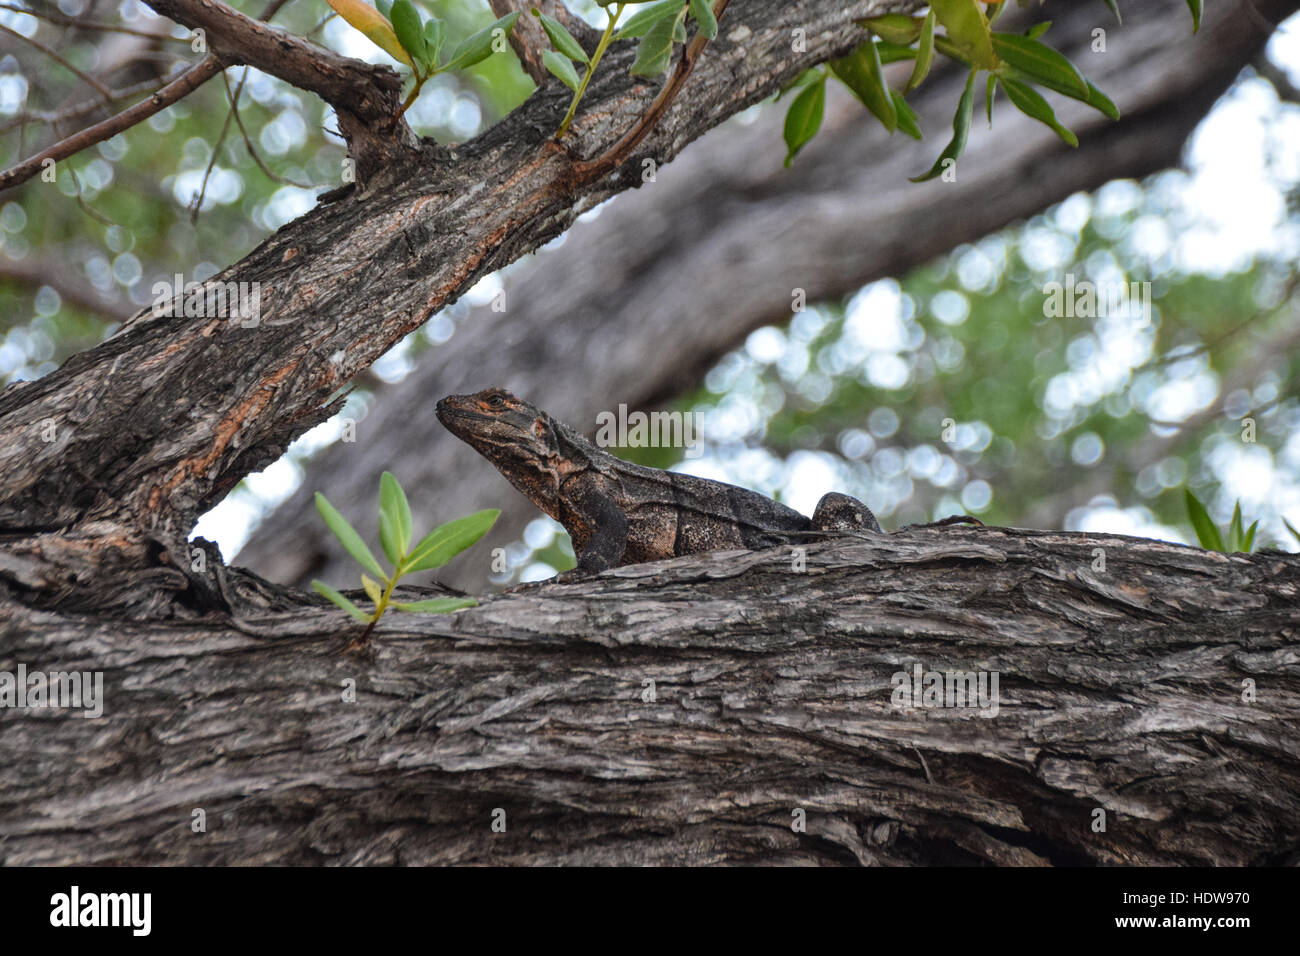 Iguana camouflaged against the tree branch Stock Photo